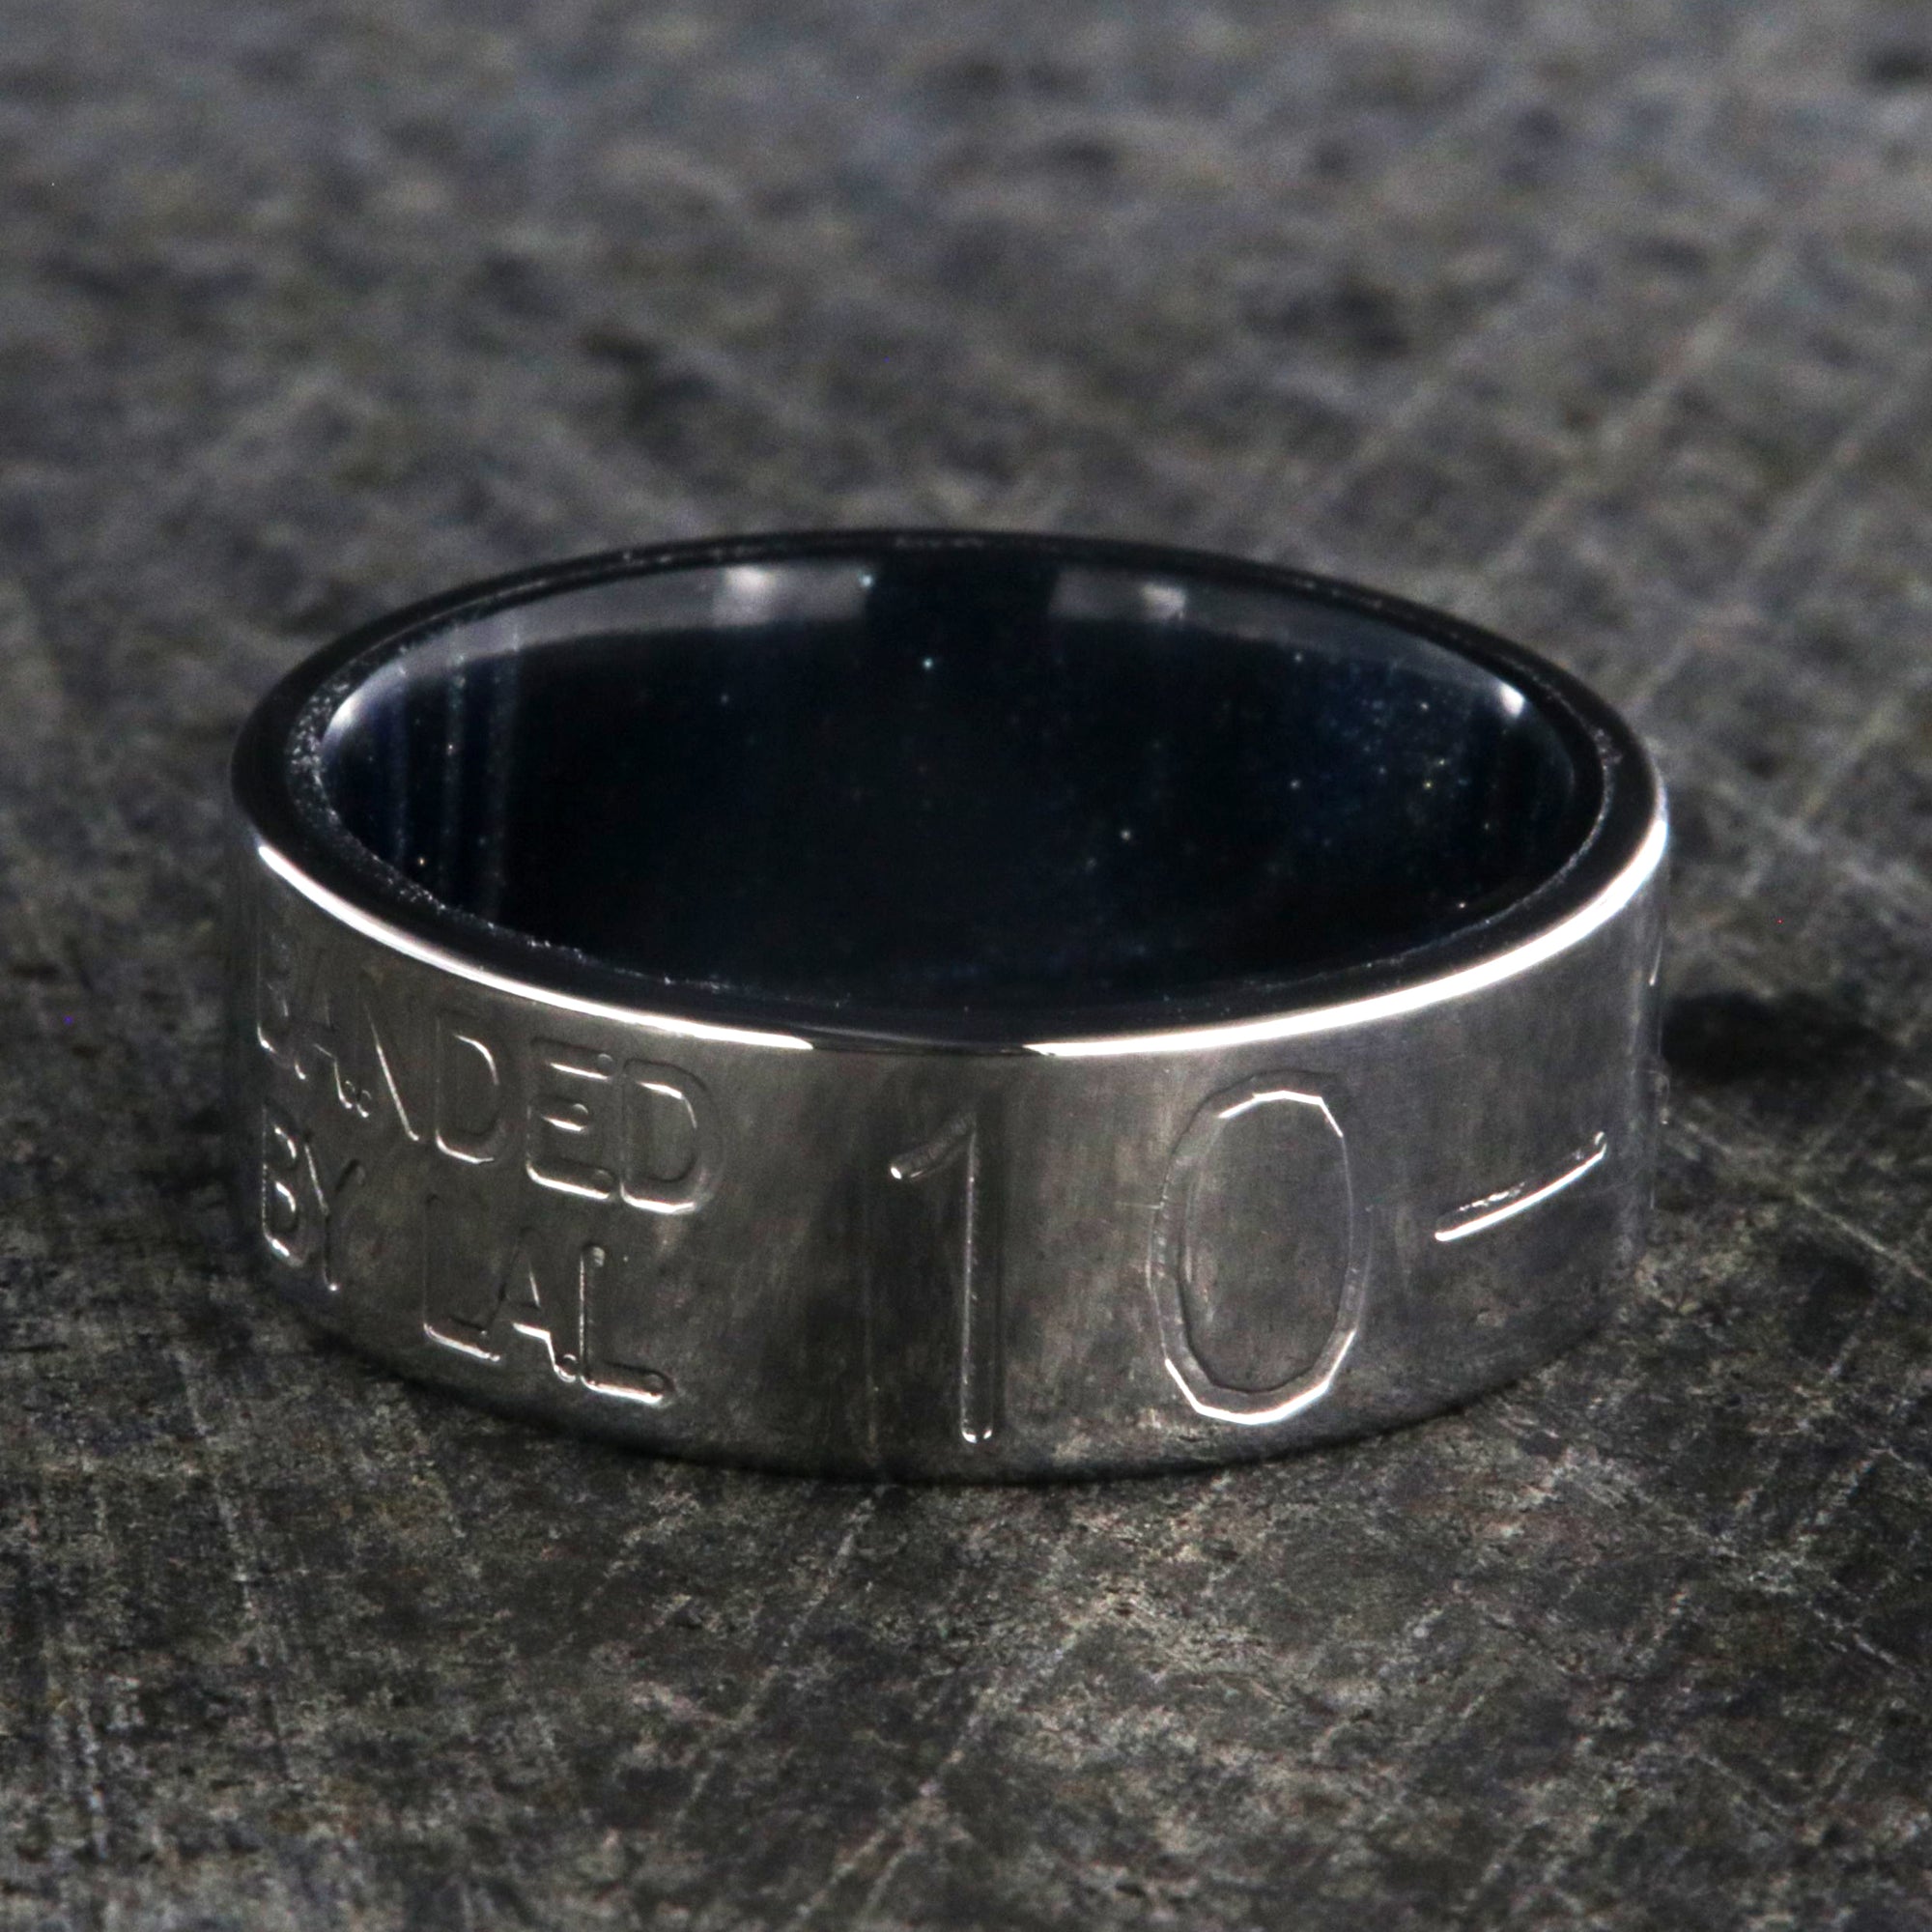 8mm wide duck band titanium ring with two lines of text adjacent to large numbers with dark blue sleeve